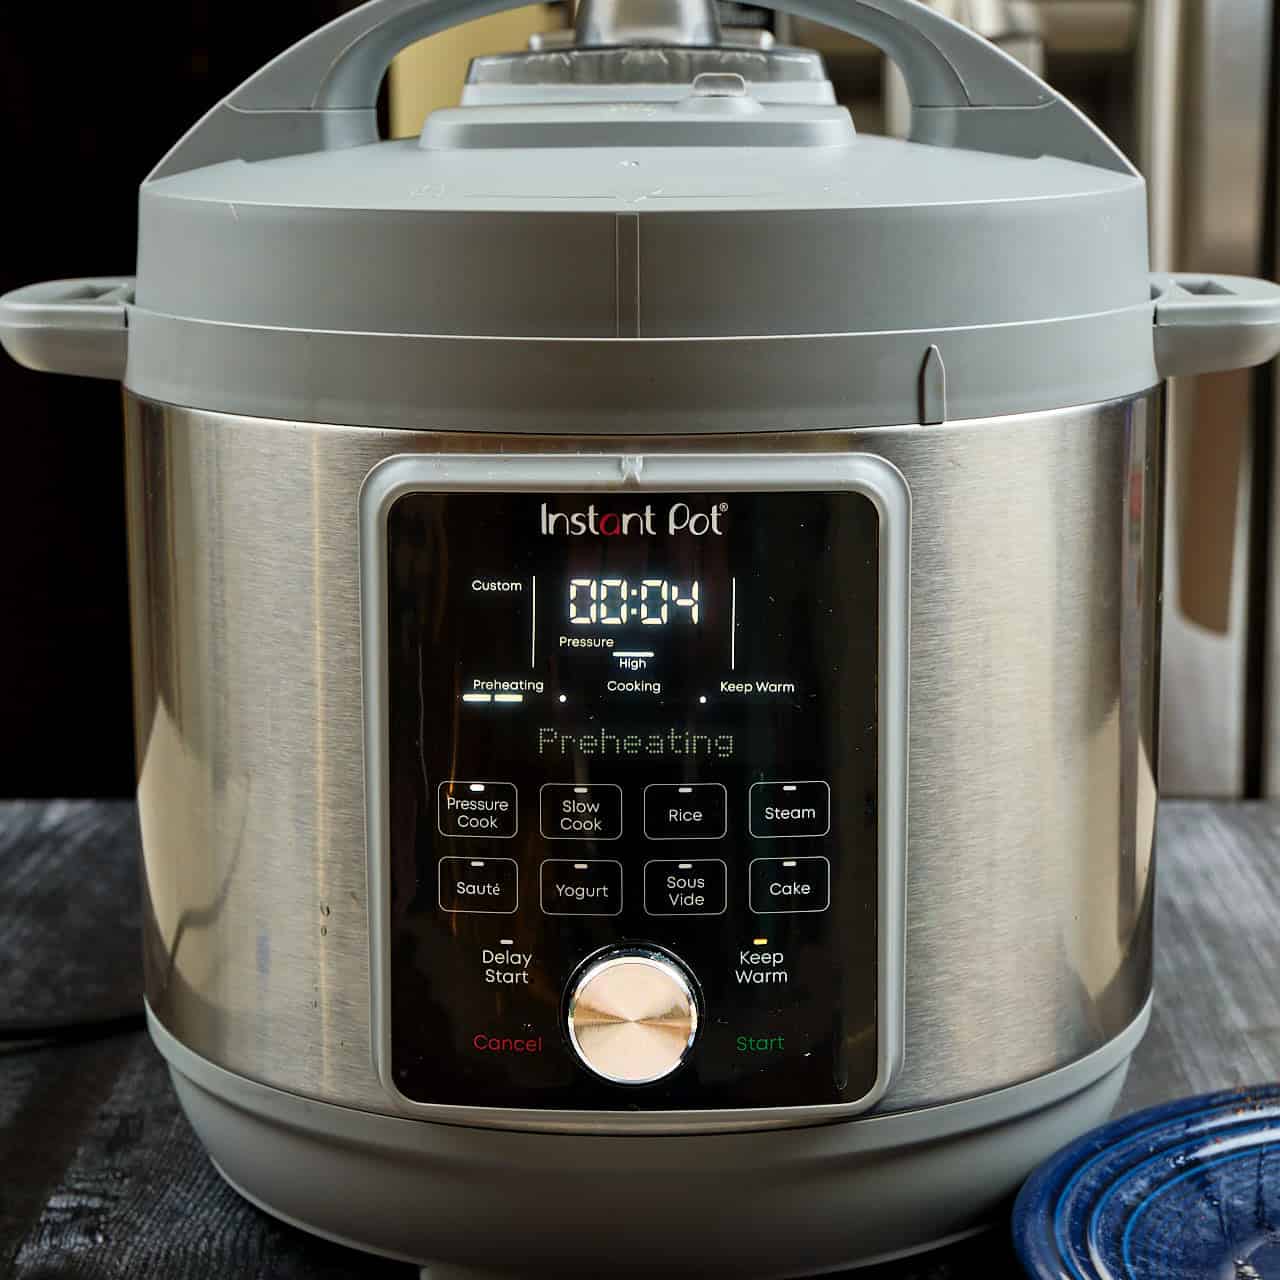 An Instant Pot set to pressure cook for 4 minutes